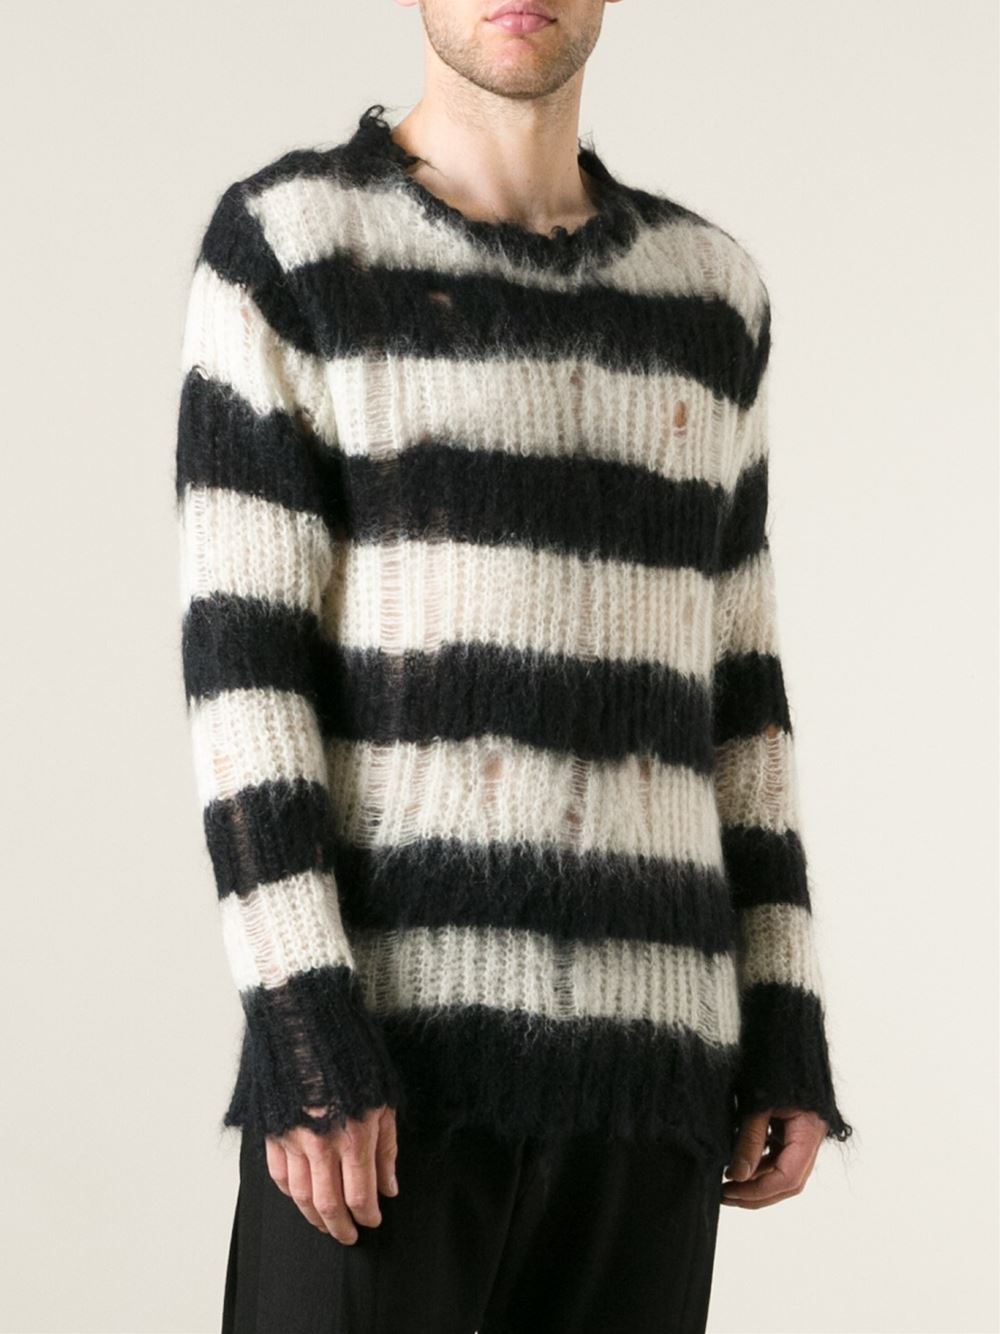 Junya Watanabe Striped Distressed Knit Sweater in Black for Men - Lyst